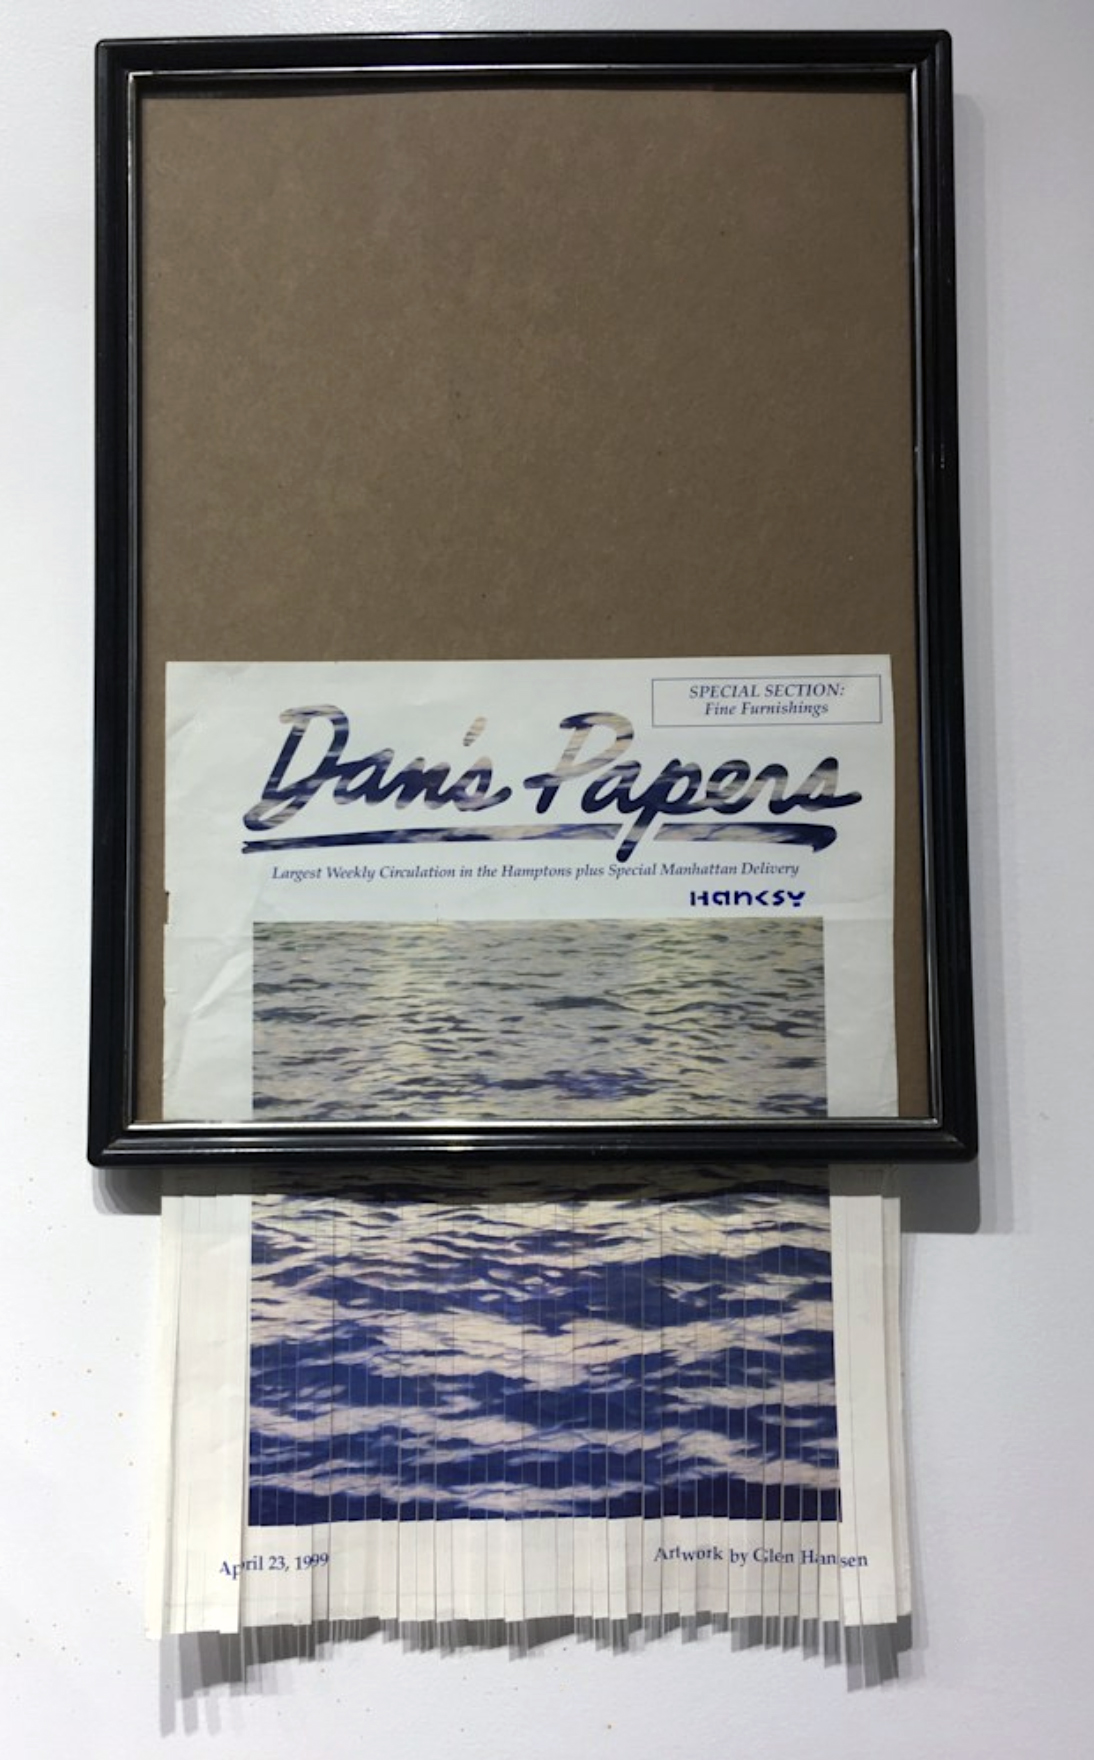 "Hanksy Original" installation (11 x 14 inches) by Glen Hansen after his own April 23, 1999 Dan's Papers cover art for Dan's Reimagined